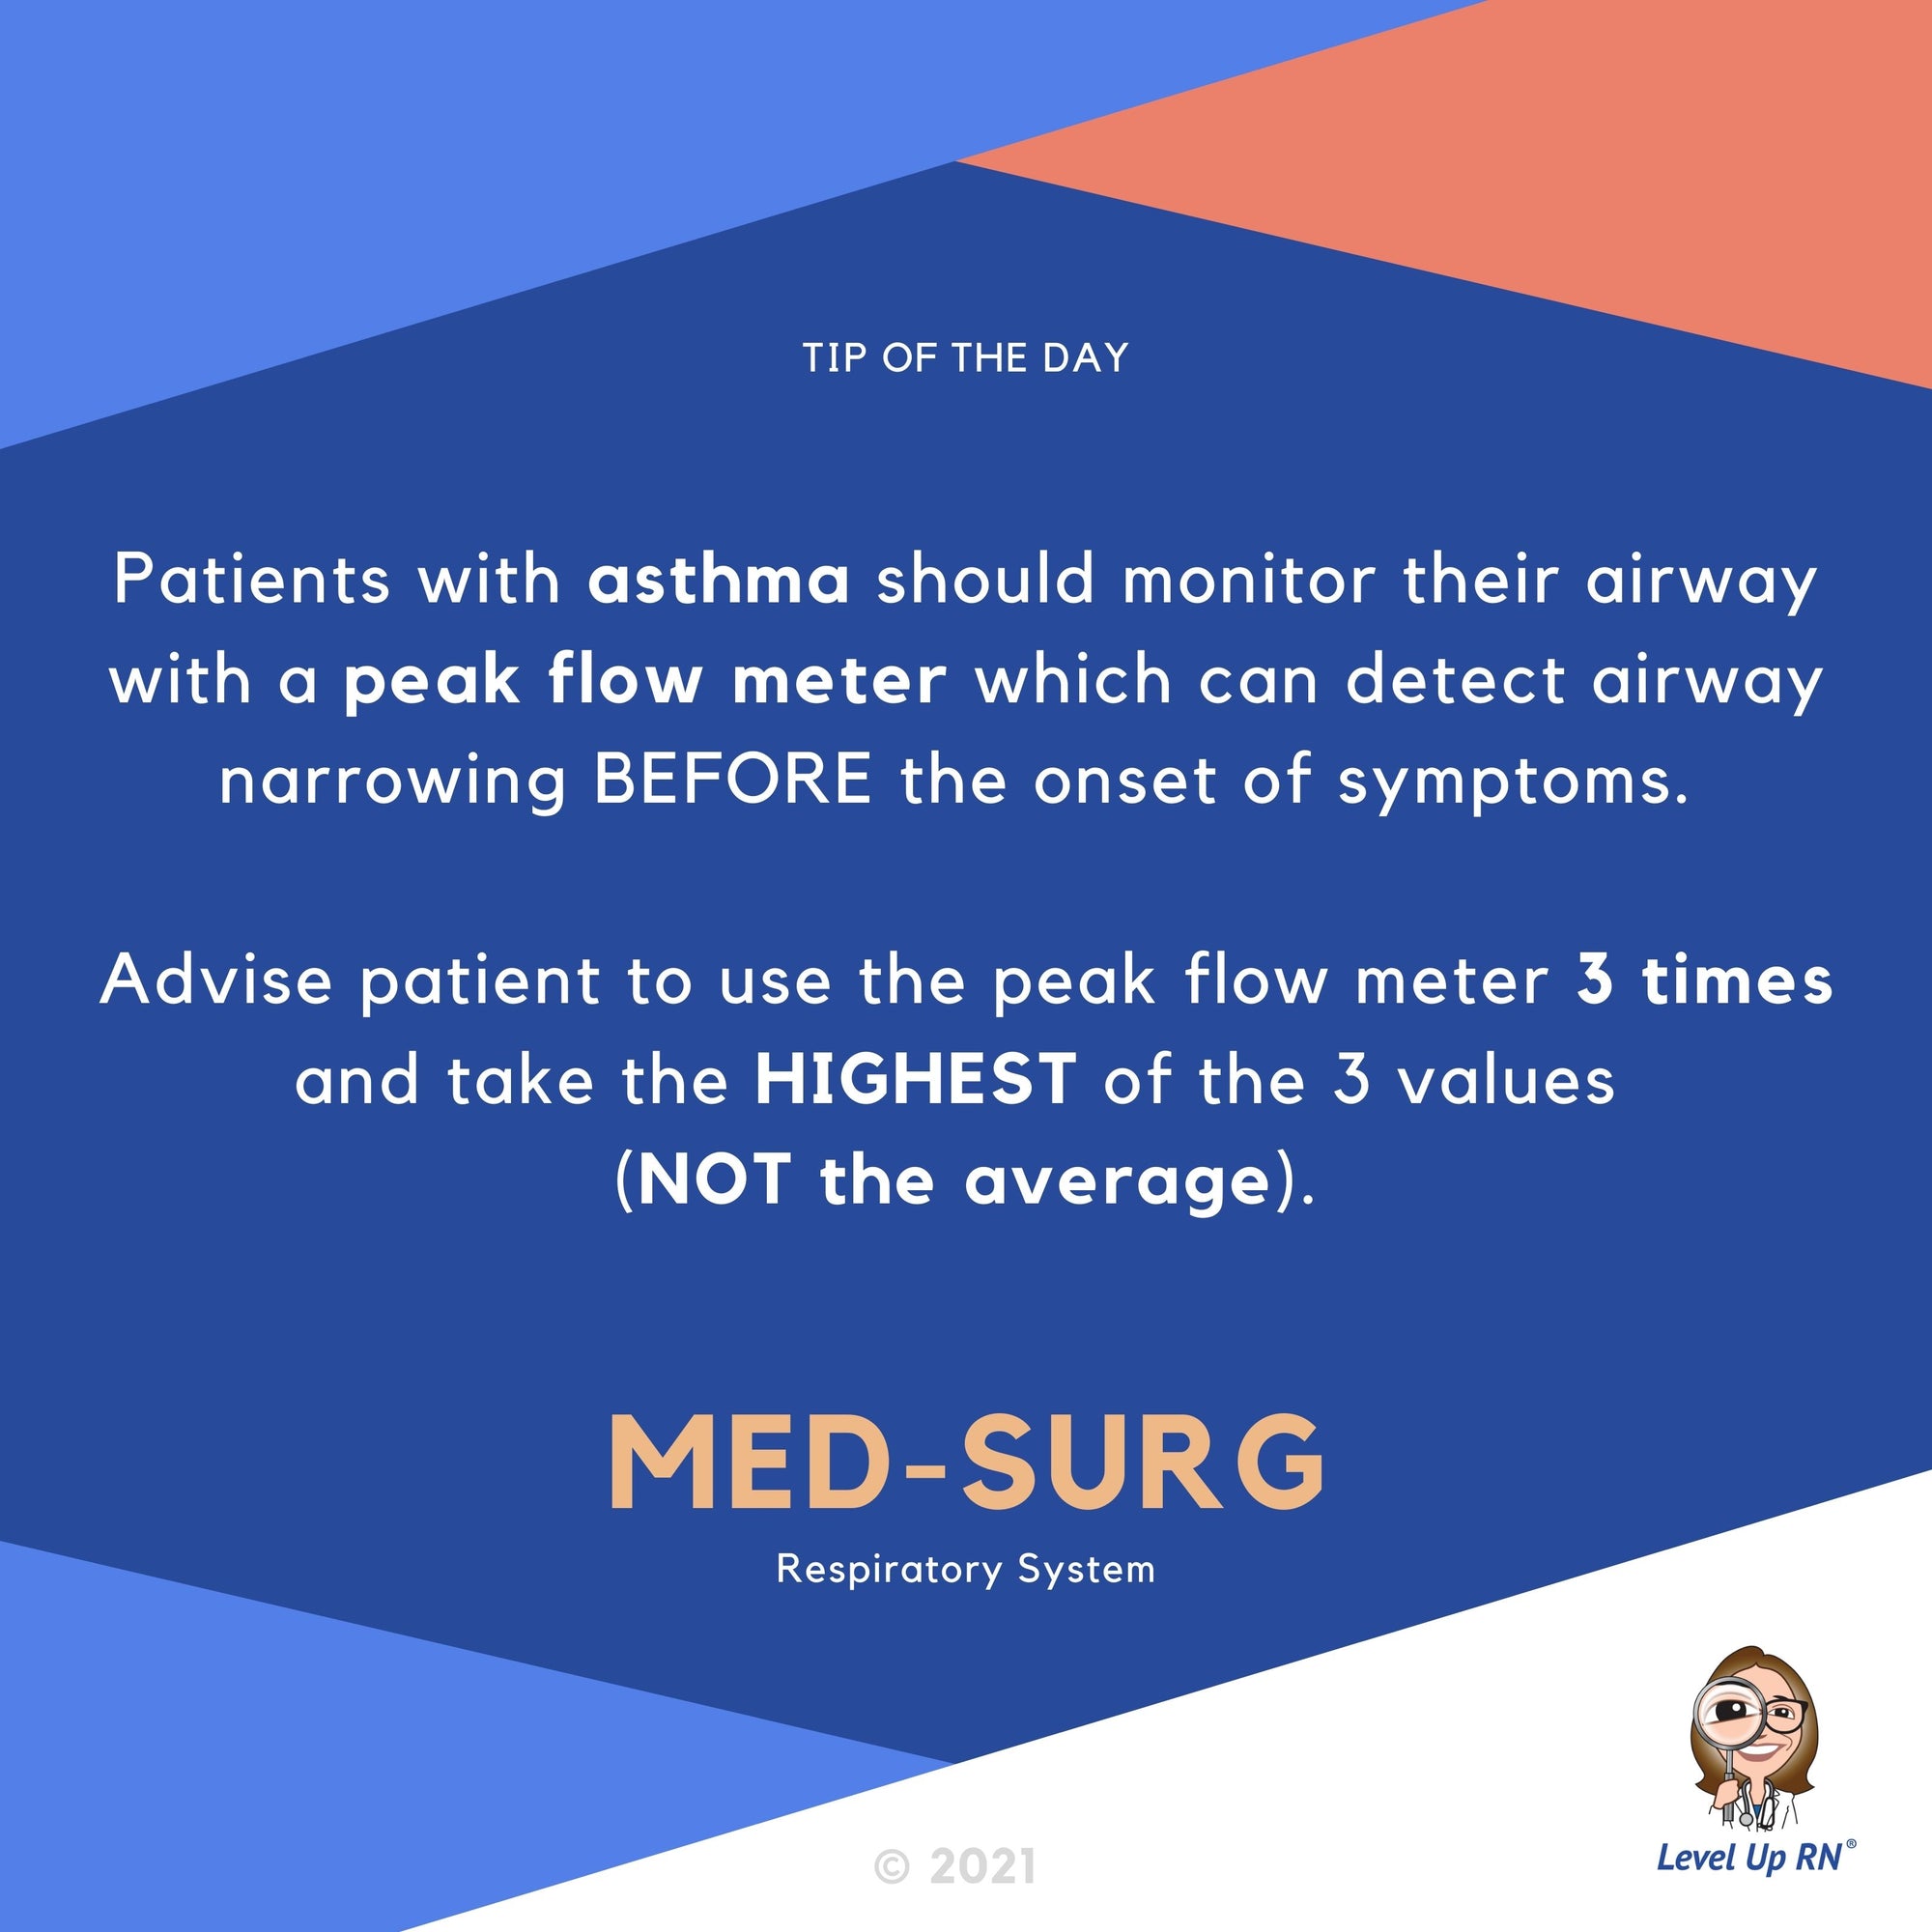 Patients with asthma should monitor their airway with a peak flow meter. This device can detect airway narrowing BEFORE the onset of symptoms.